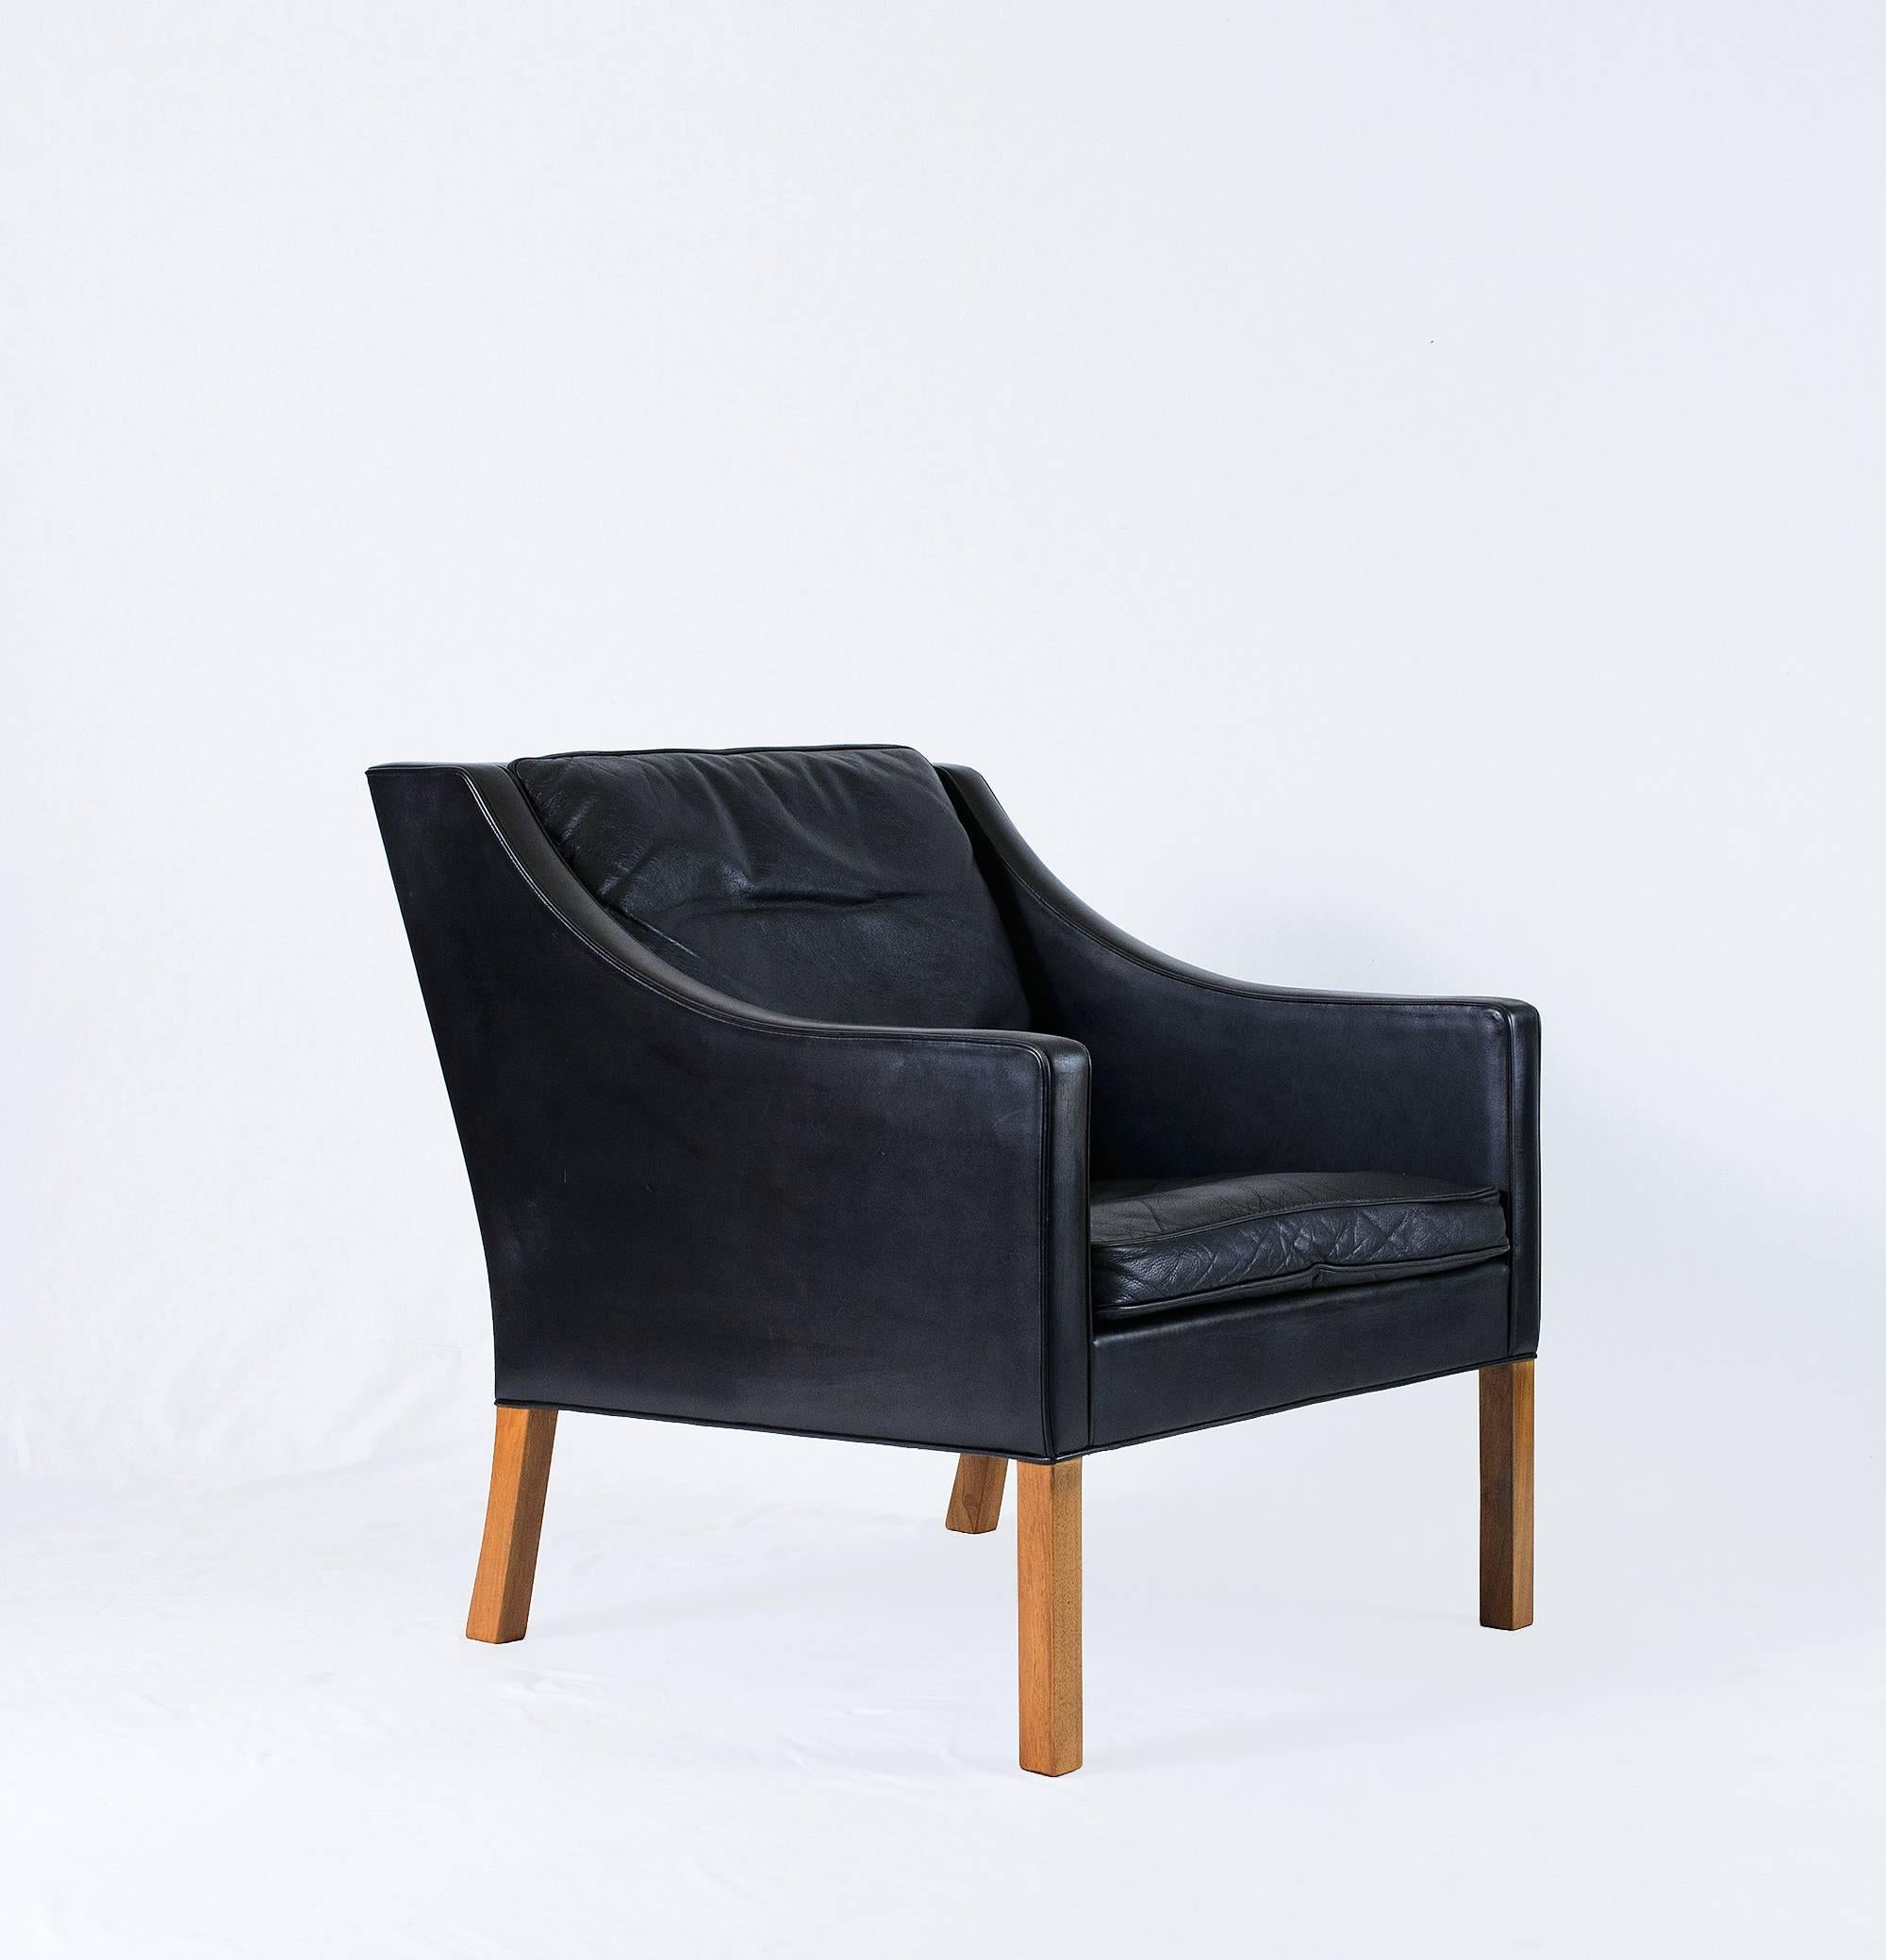 Børge Mogensen model #2207 leather lounge chair designed in 1963 and produced by Fredericia.